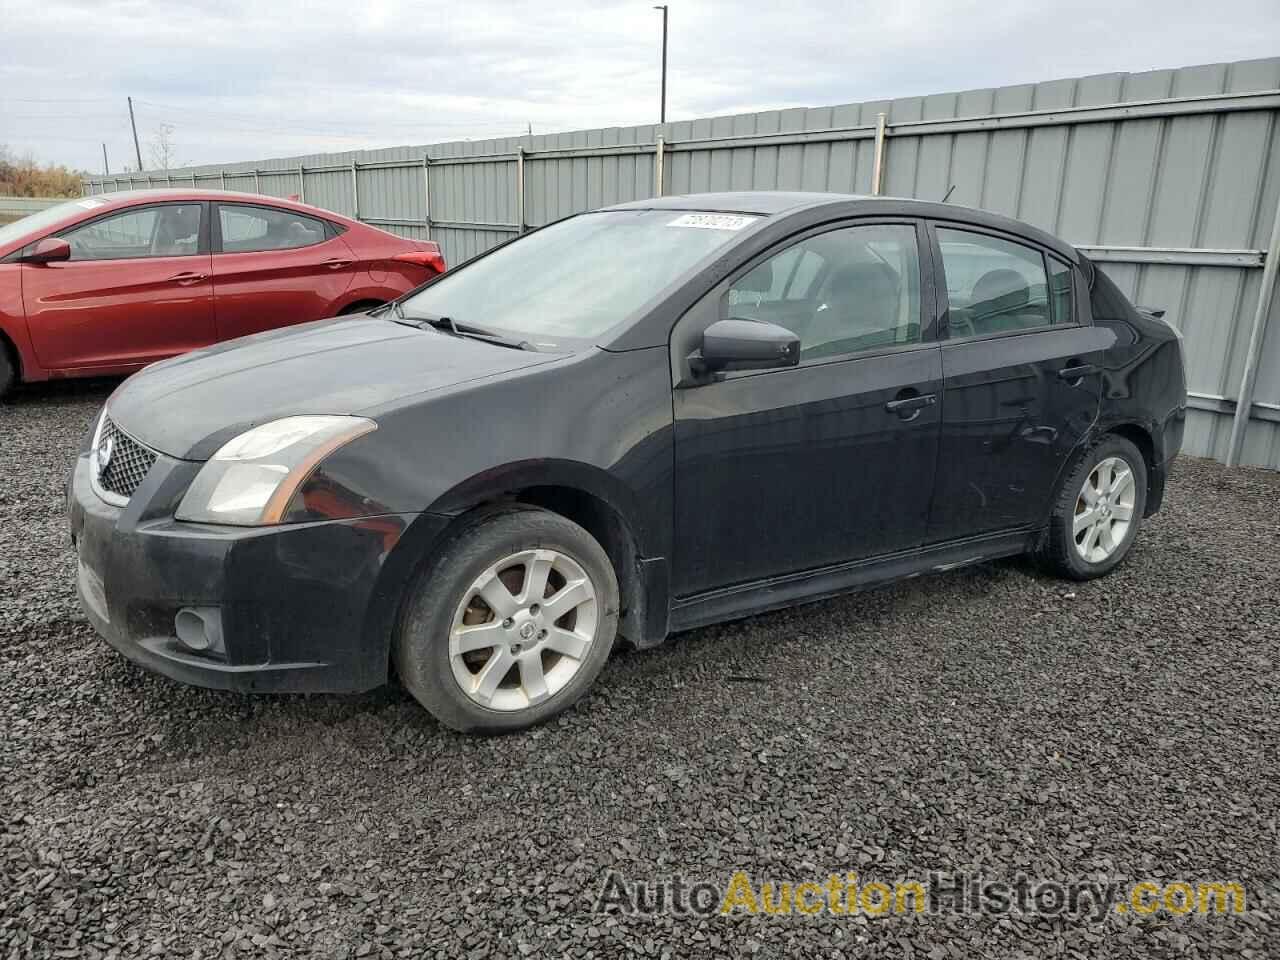 2012 NISSAN SENTRA 2.0, 3N1AB6APXCL699323